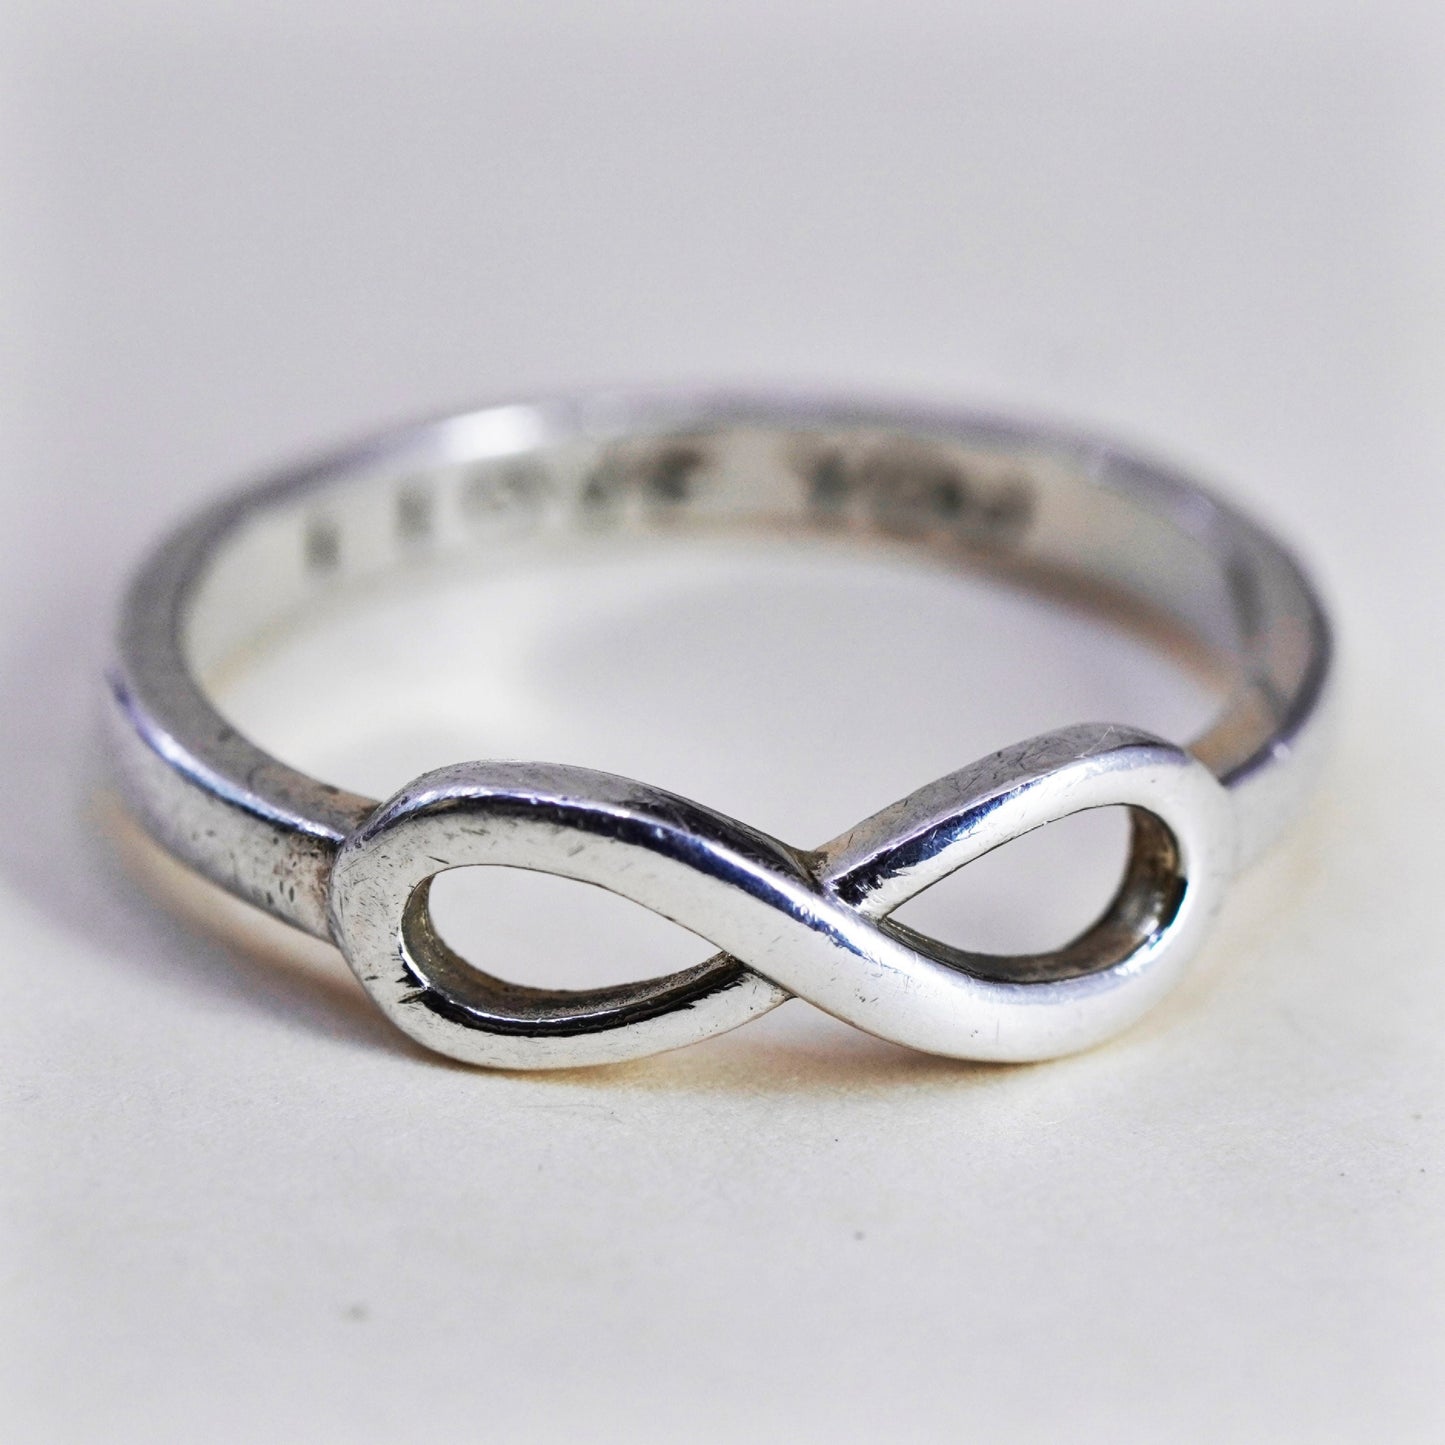 Size 6, vtg Sterling 925 silver handmade infinity loop band ring “I love you”